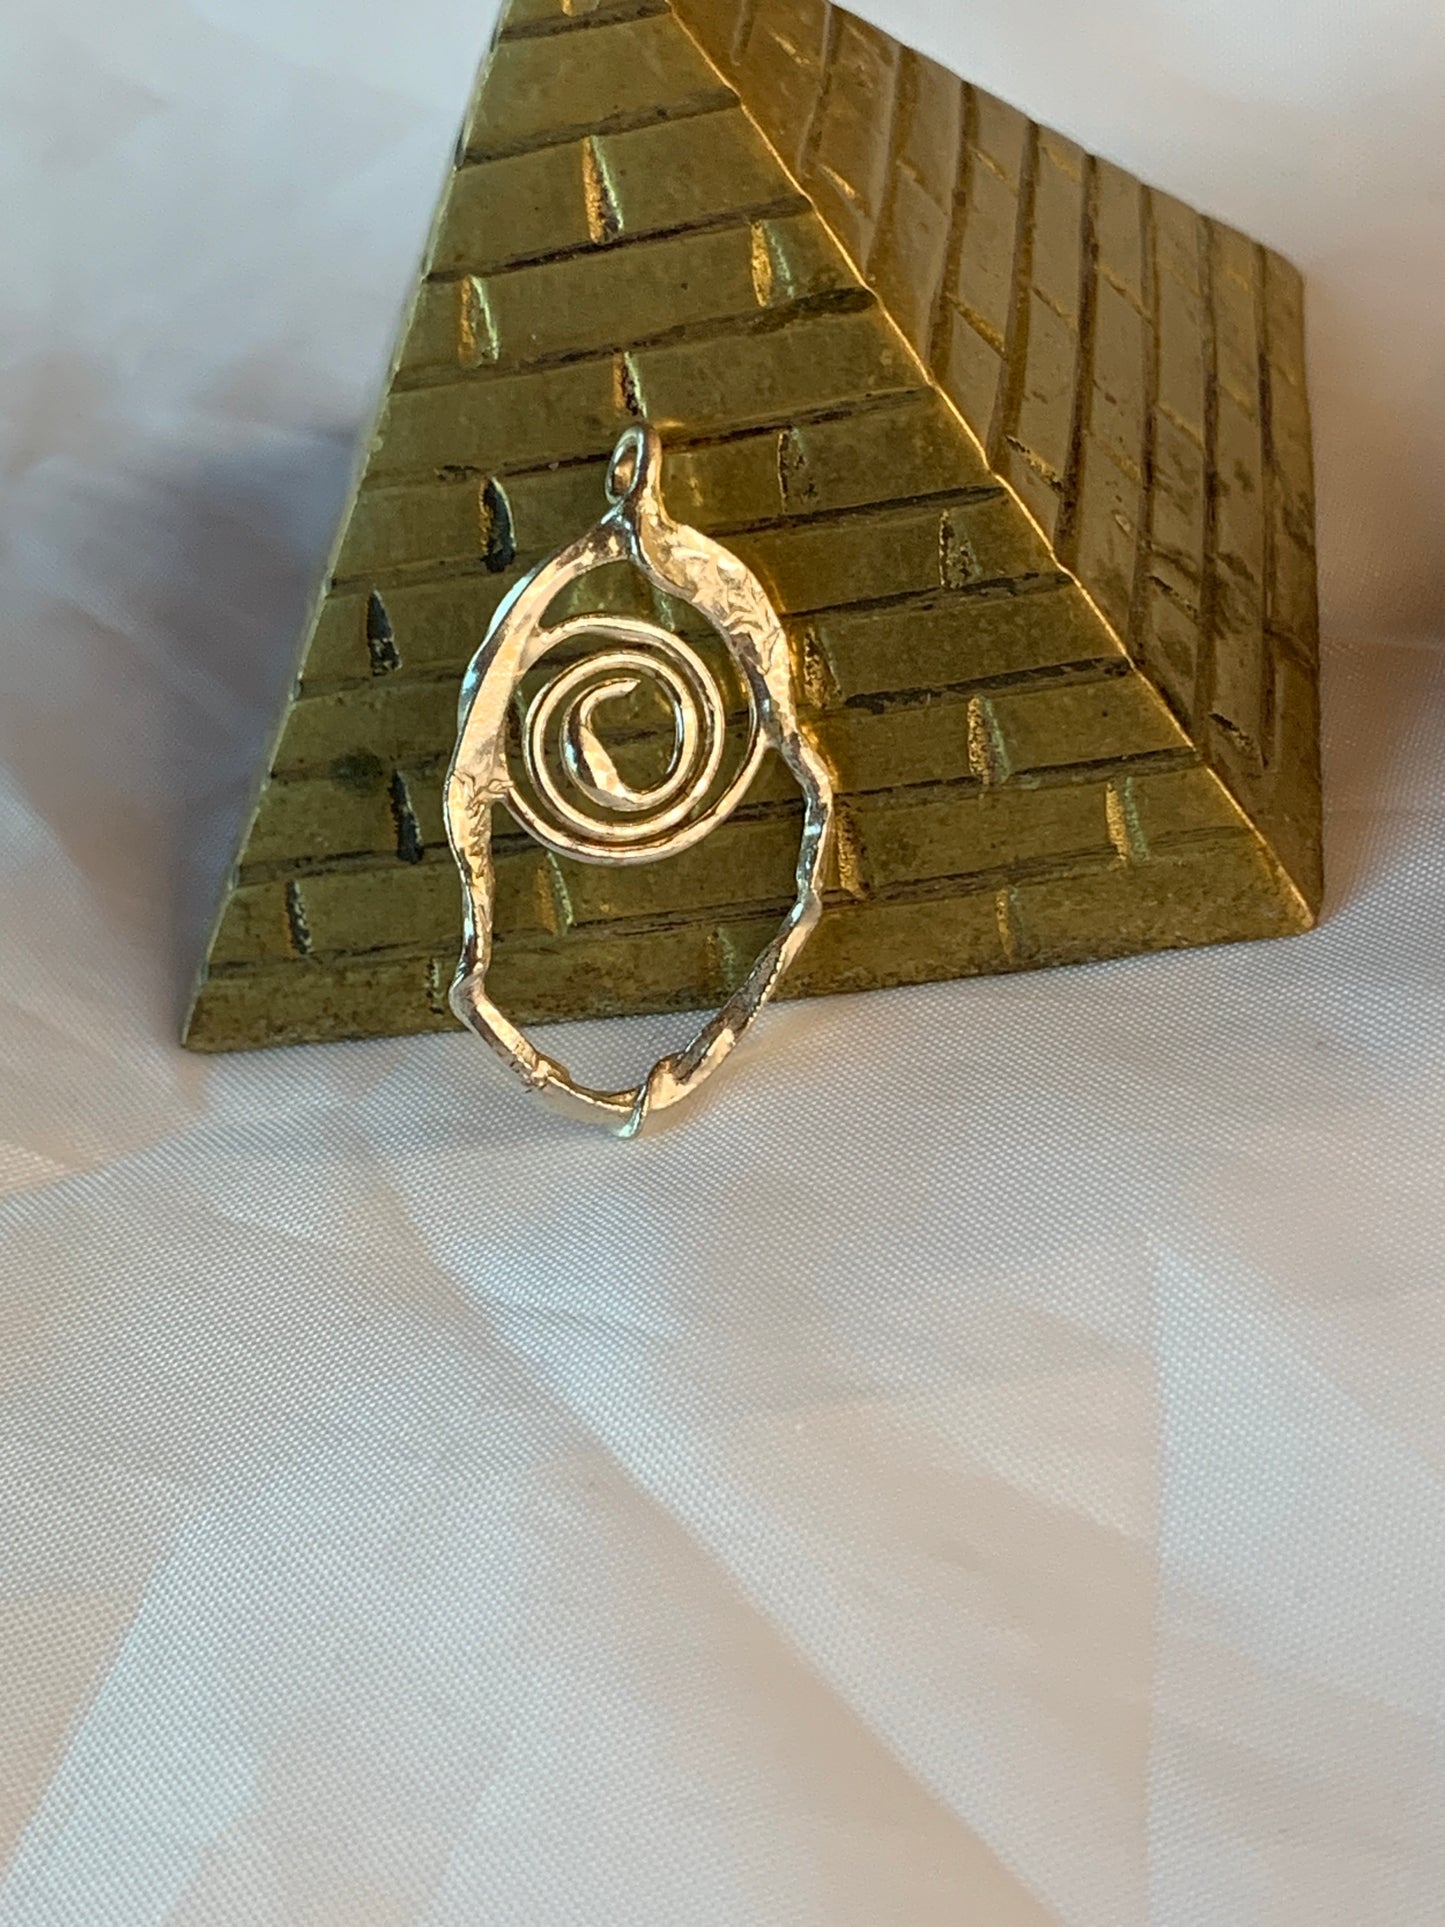 Fused Abstract Sterling Silver Spiral Pendant